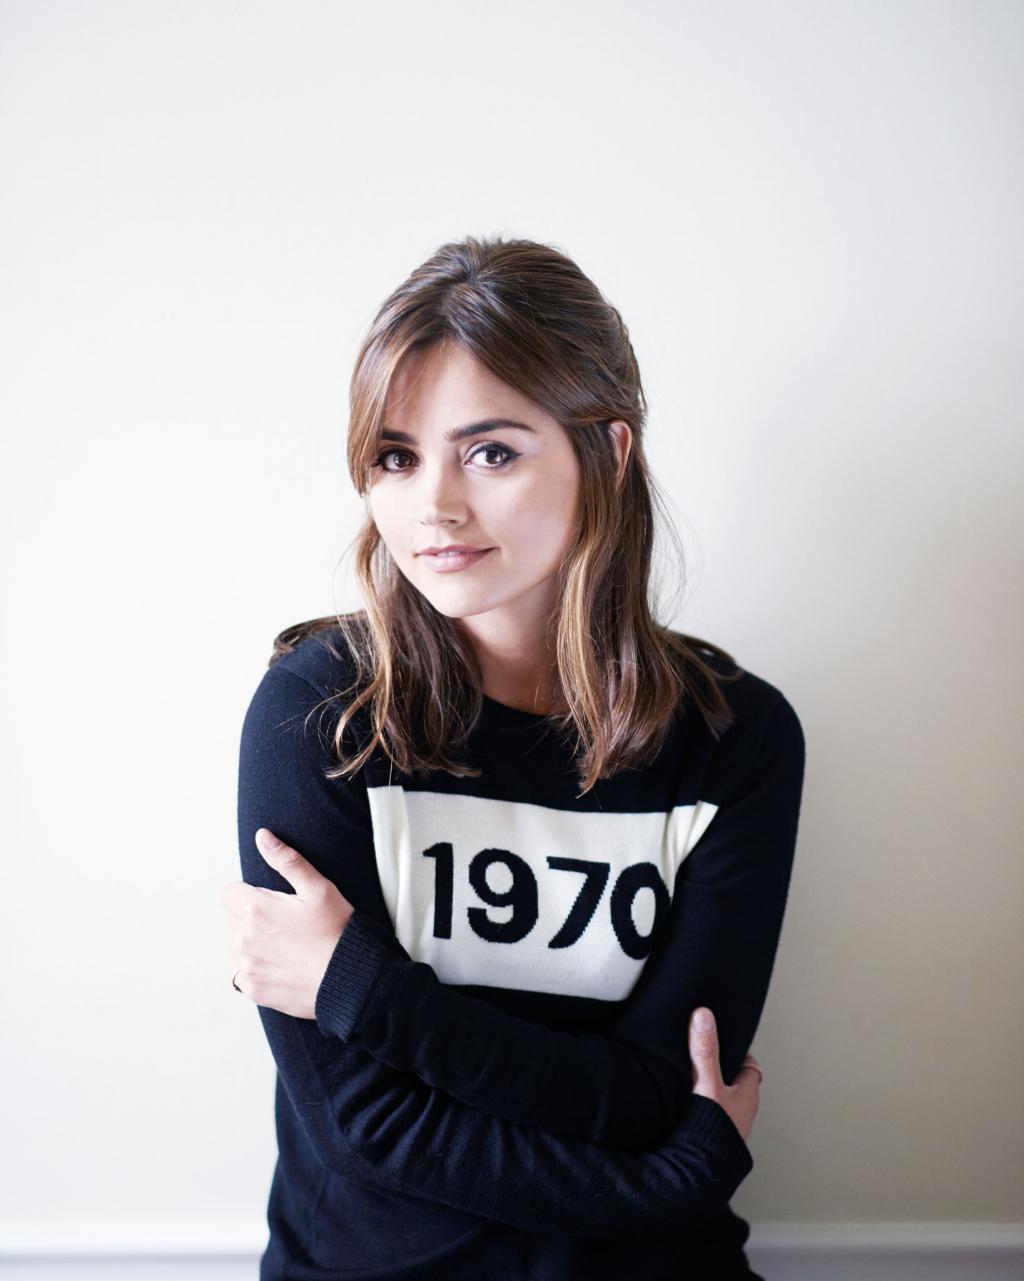 Doctor Who Star Jenna Coleman: "Peter Capaldi Is Almost